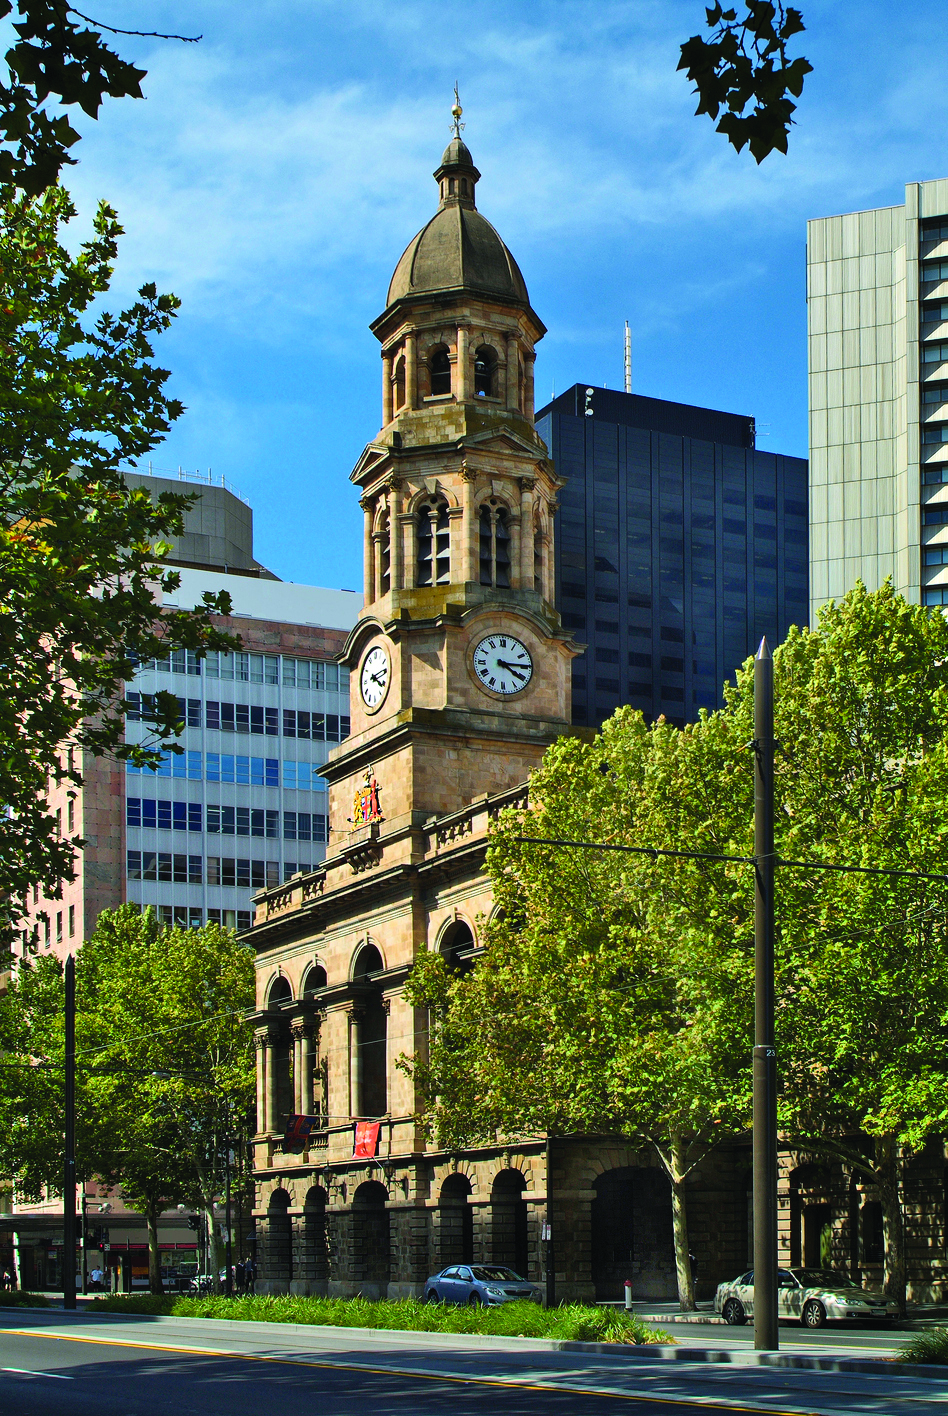 The historic Adelaide Town Hall with its prominent clock tower, nestled among modern buildings and green trees under a blue sky.